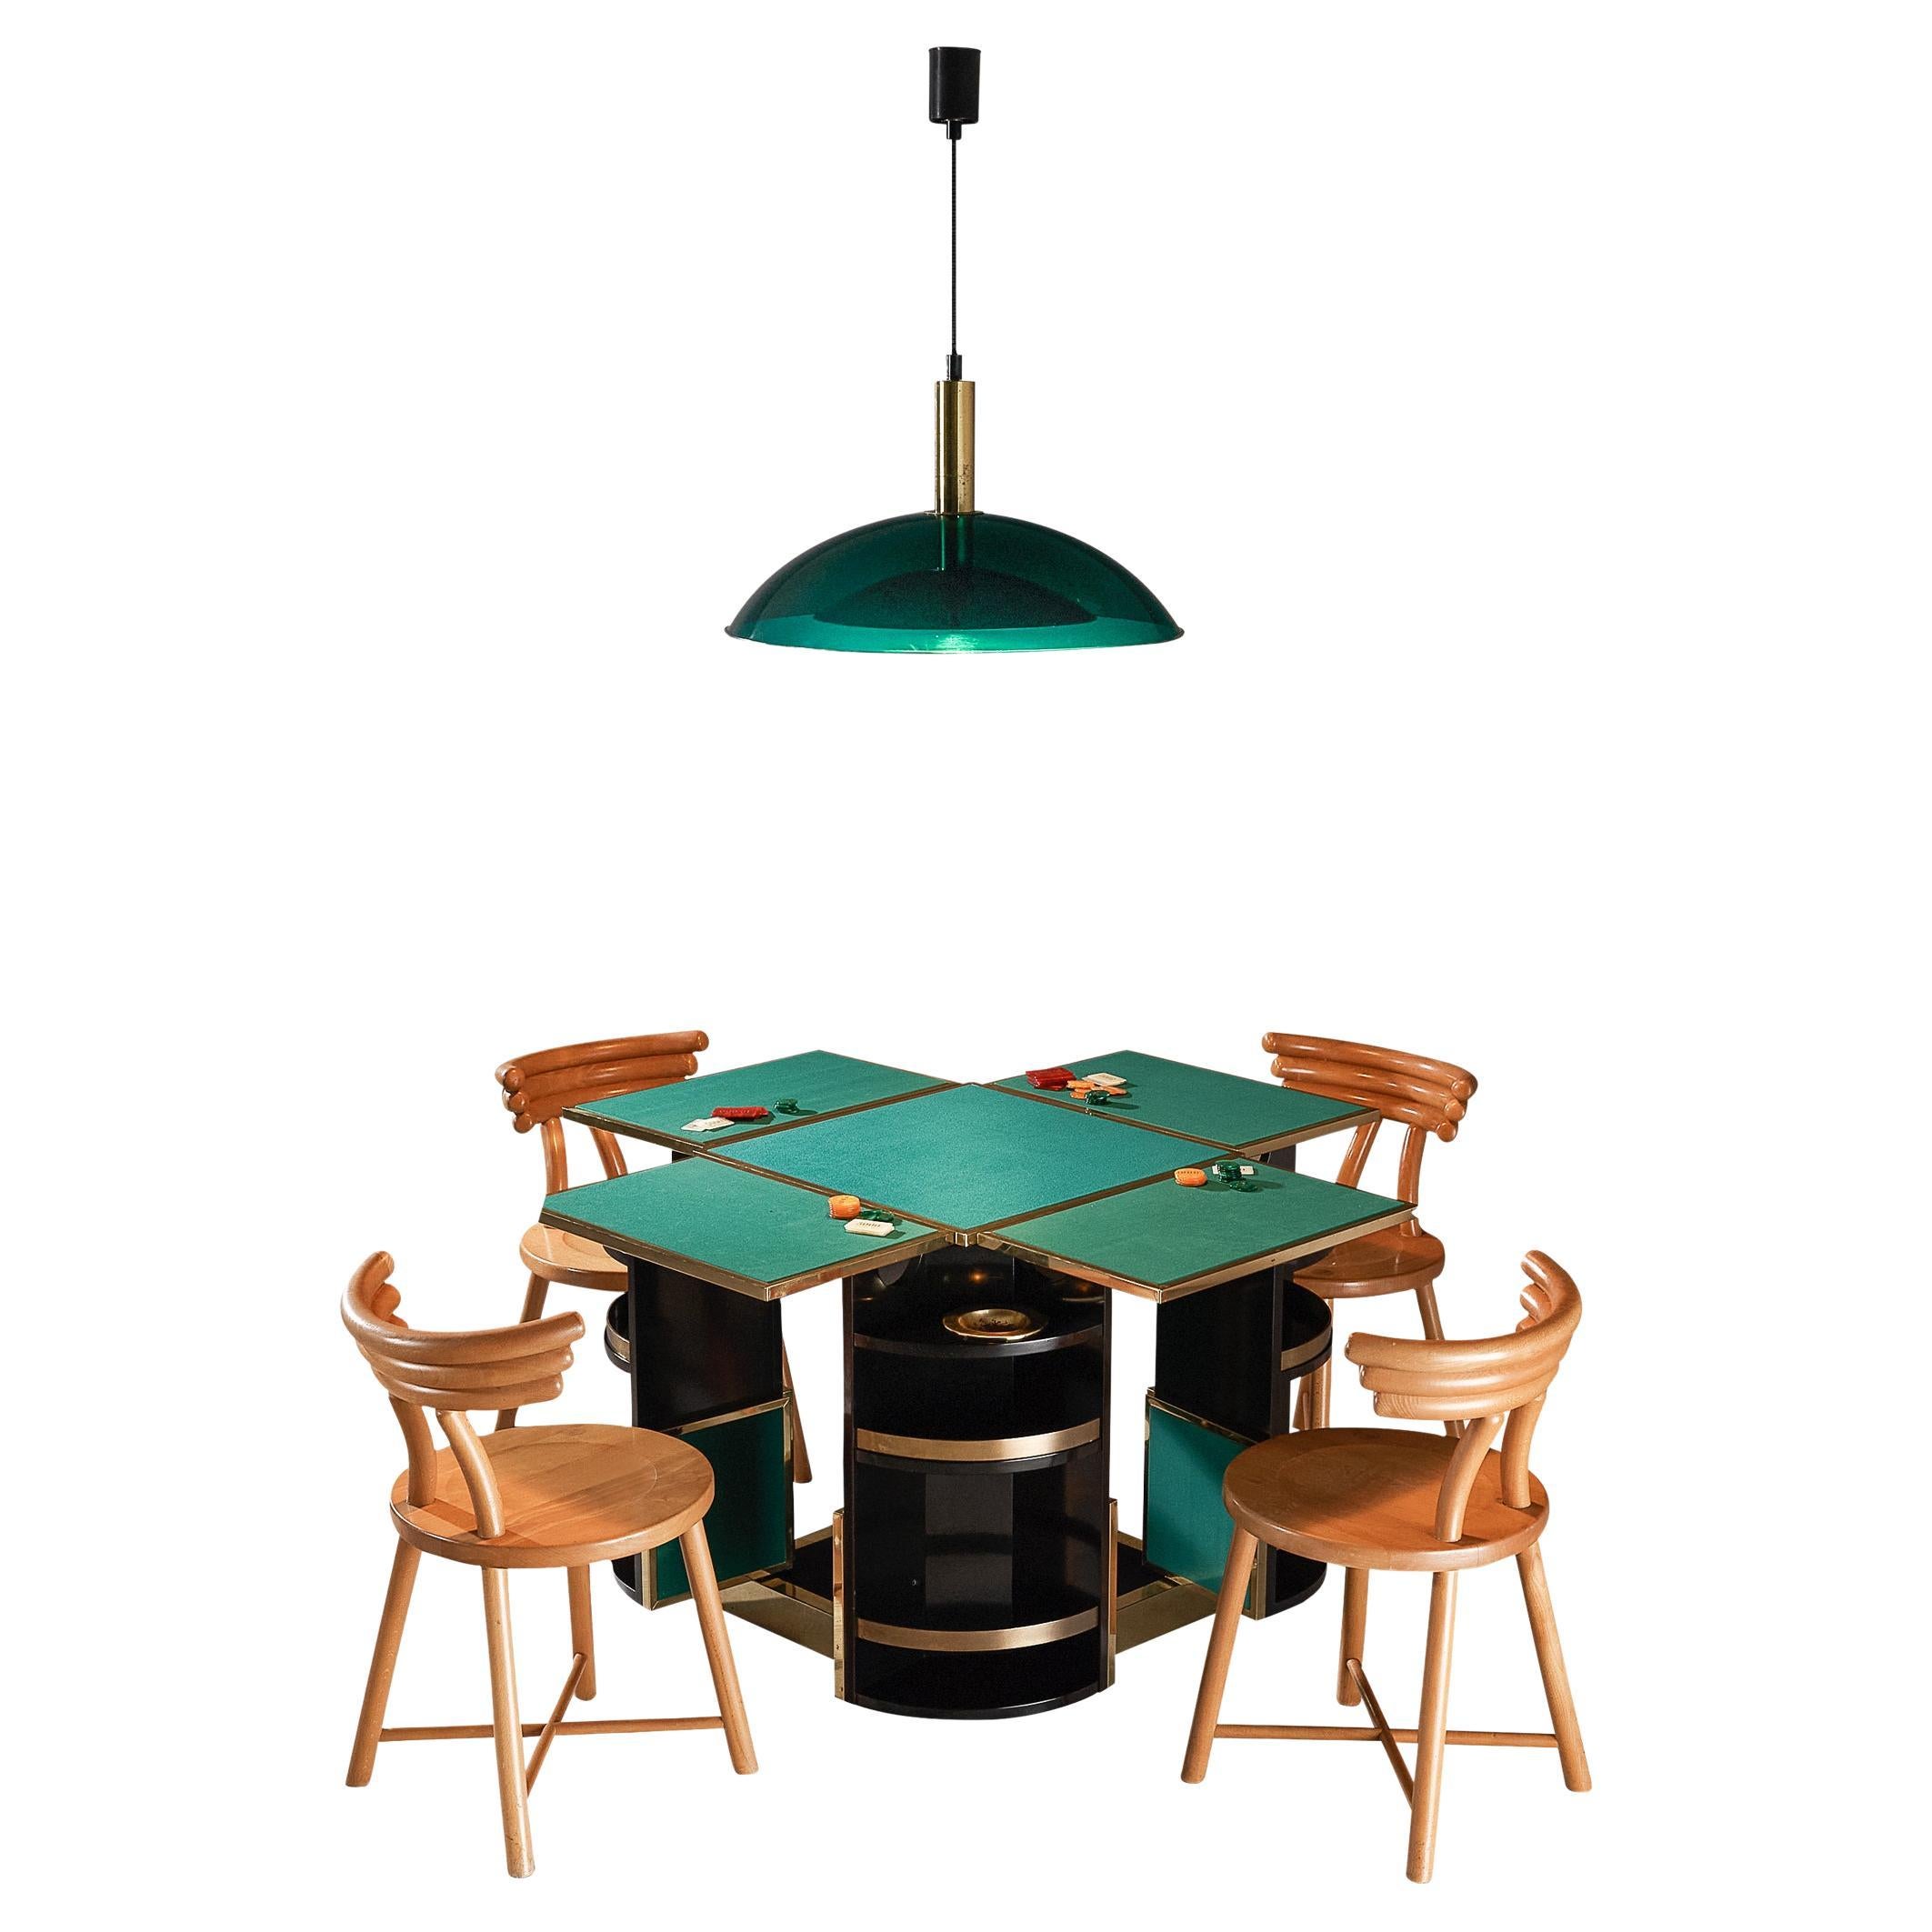 Renato Meneghetti 'Cubo' Folding Game Table Set with Pendant and Chairs